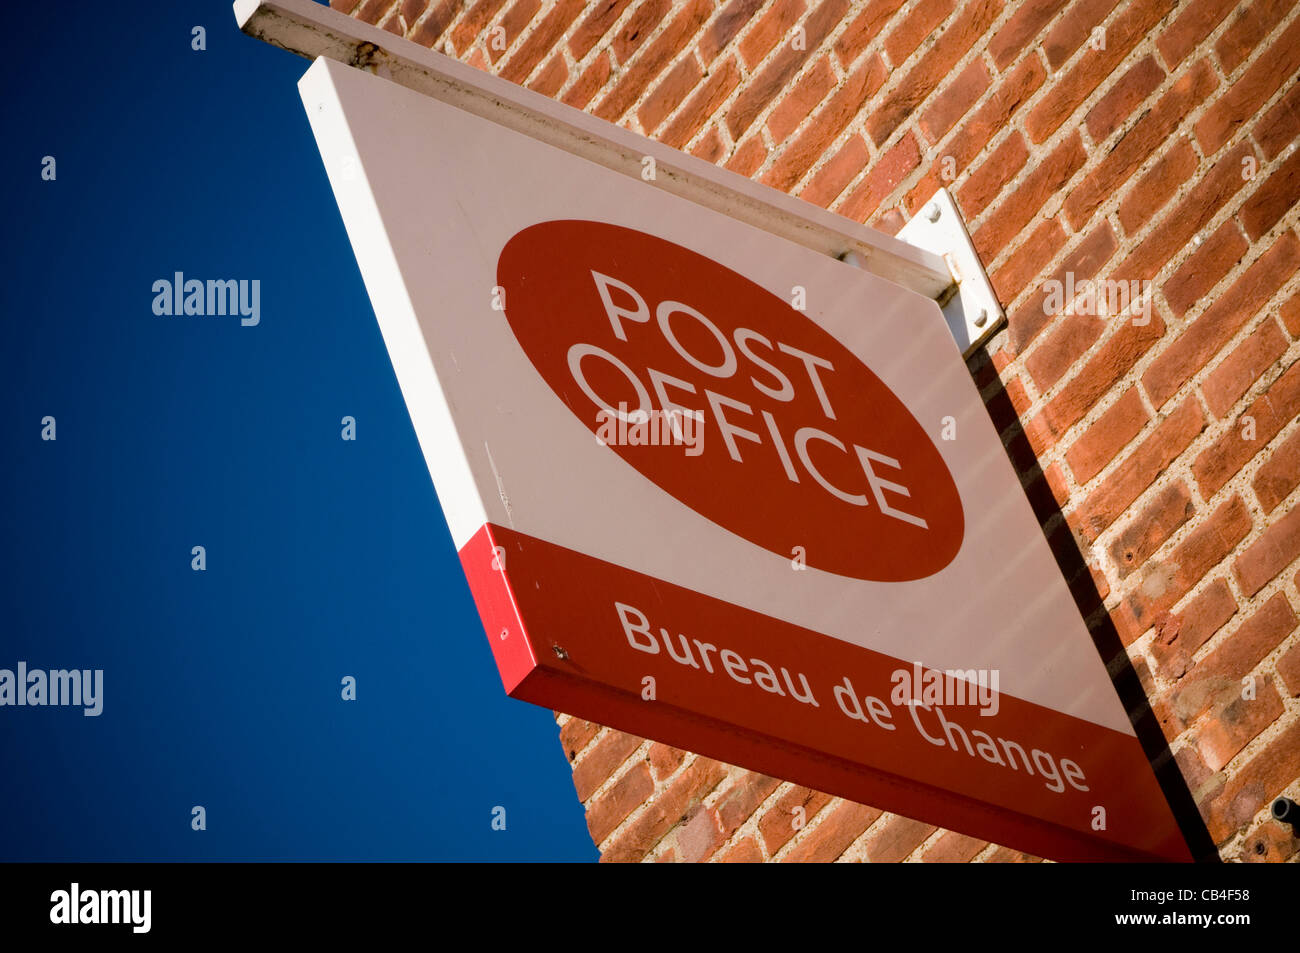 post office uk postal service mail carrier institution Stock Photo